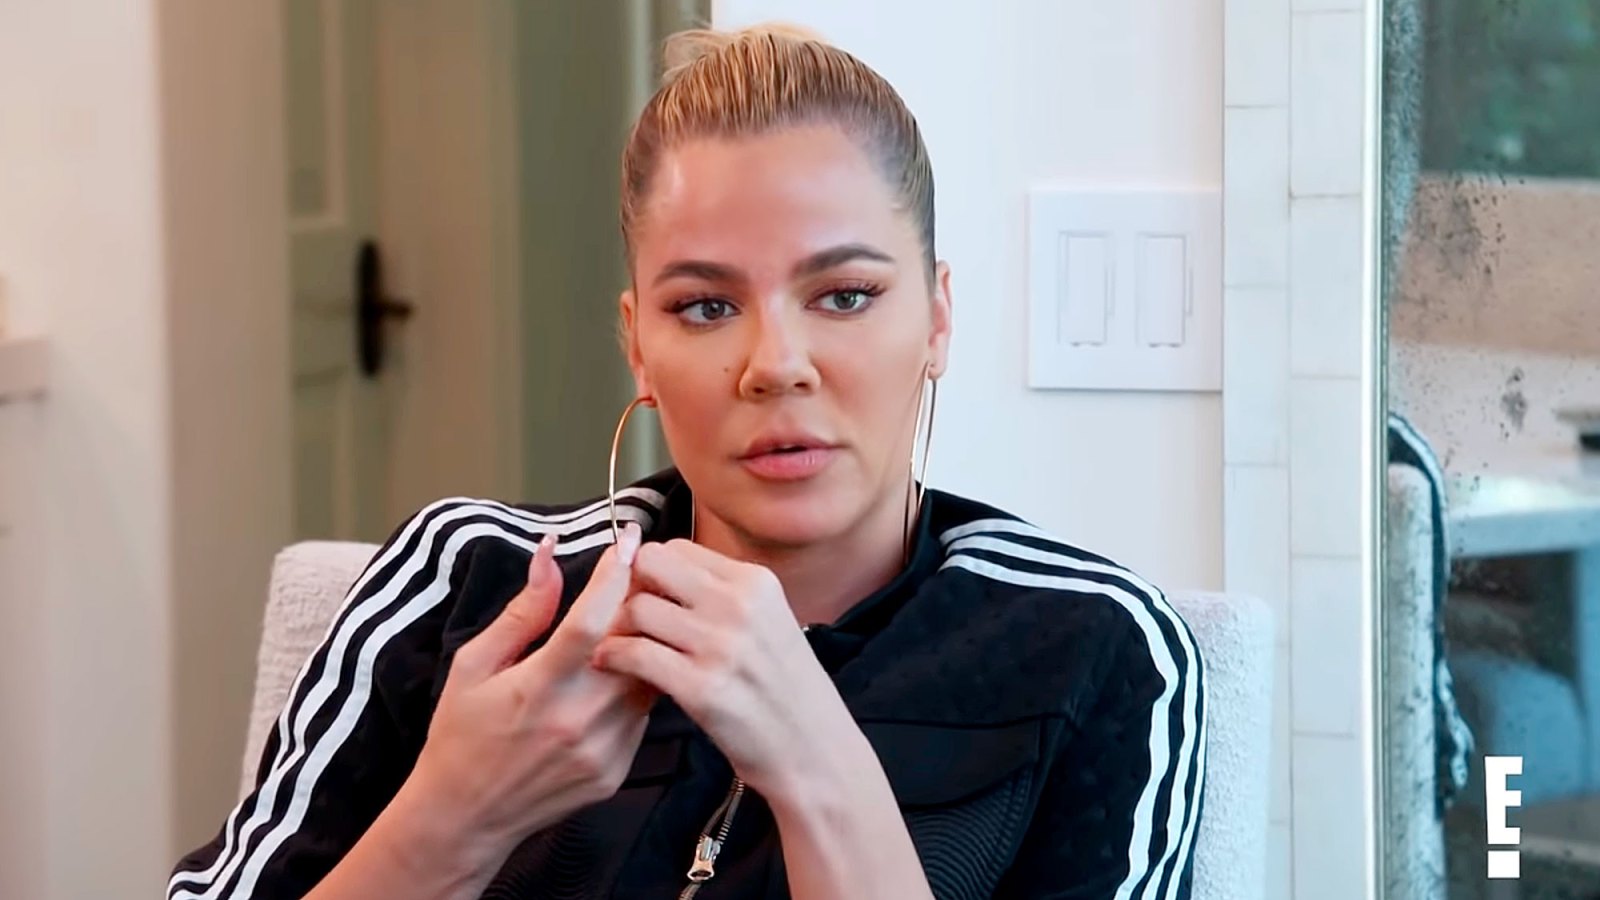 Khloe Kardashian Doesnt Care to Freeze Her Eggs and Says She May Never Date Again After Tristan Thompson Split